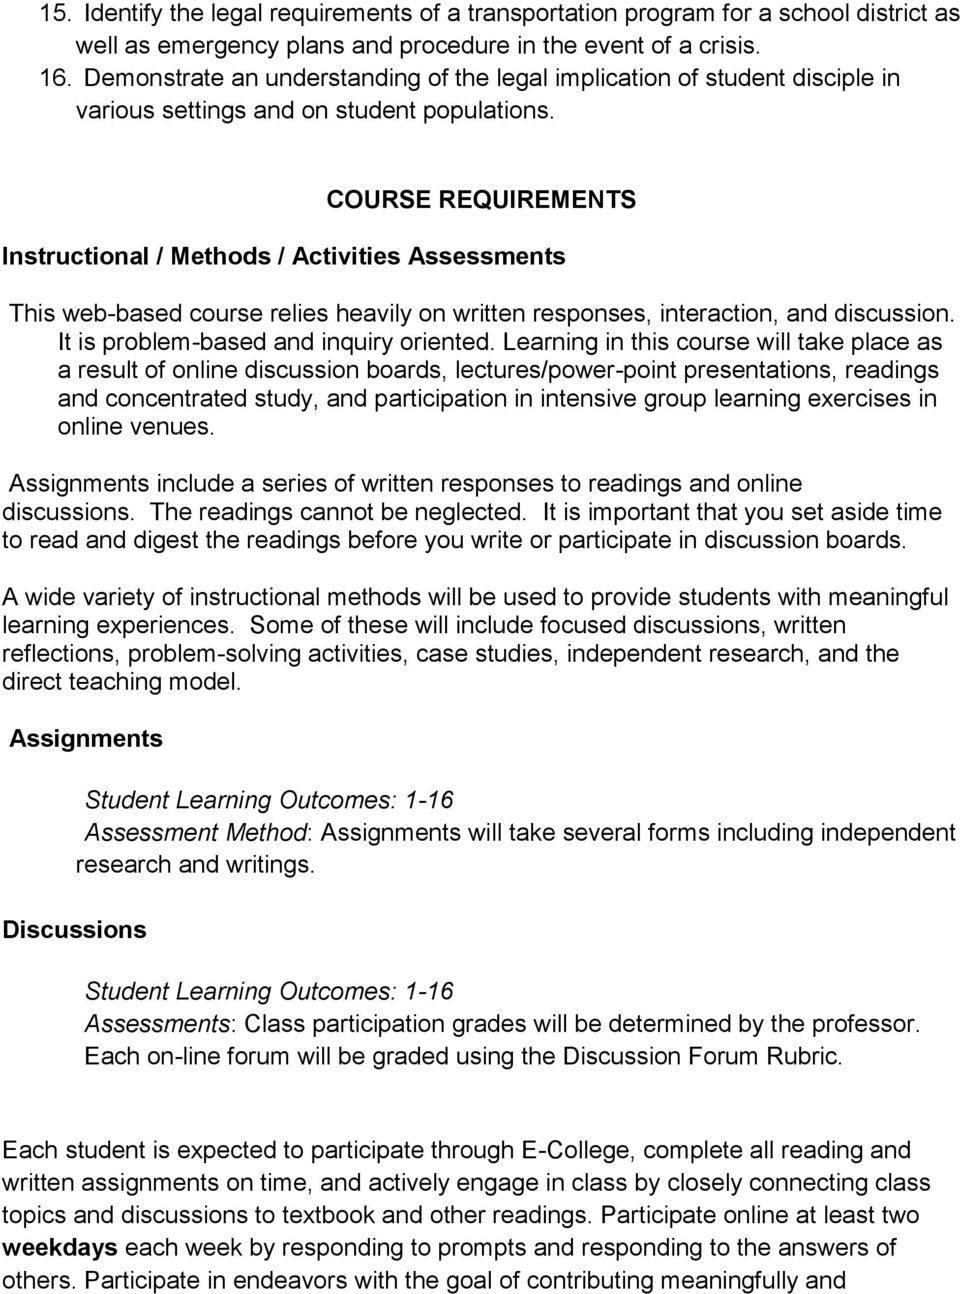 COURSE REQUIREMENTS Instructional / Methods / Activities Assessments This web-based course relies heavily on written responses, interaction, and discussion. It is problem-based and inquiry oriented.